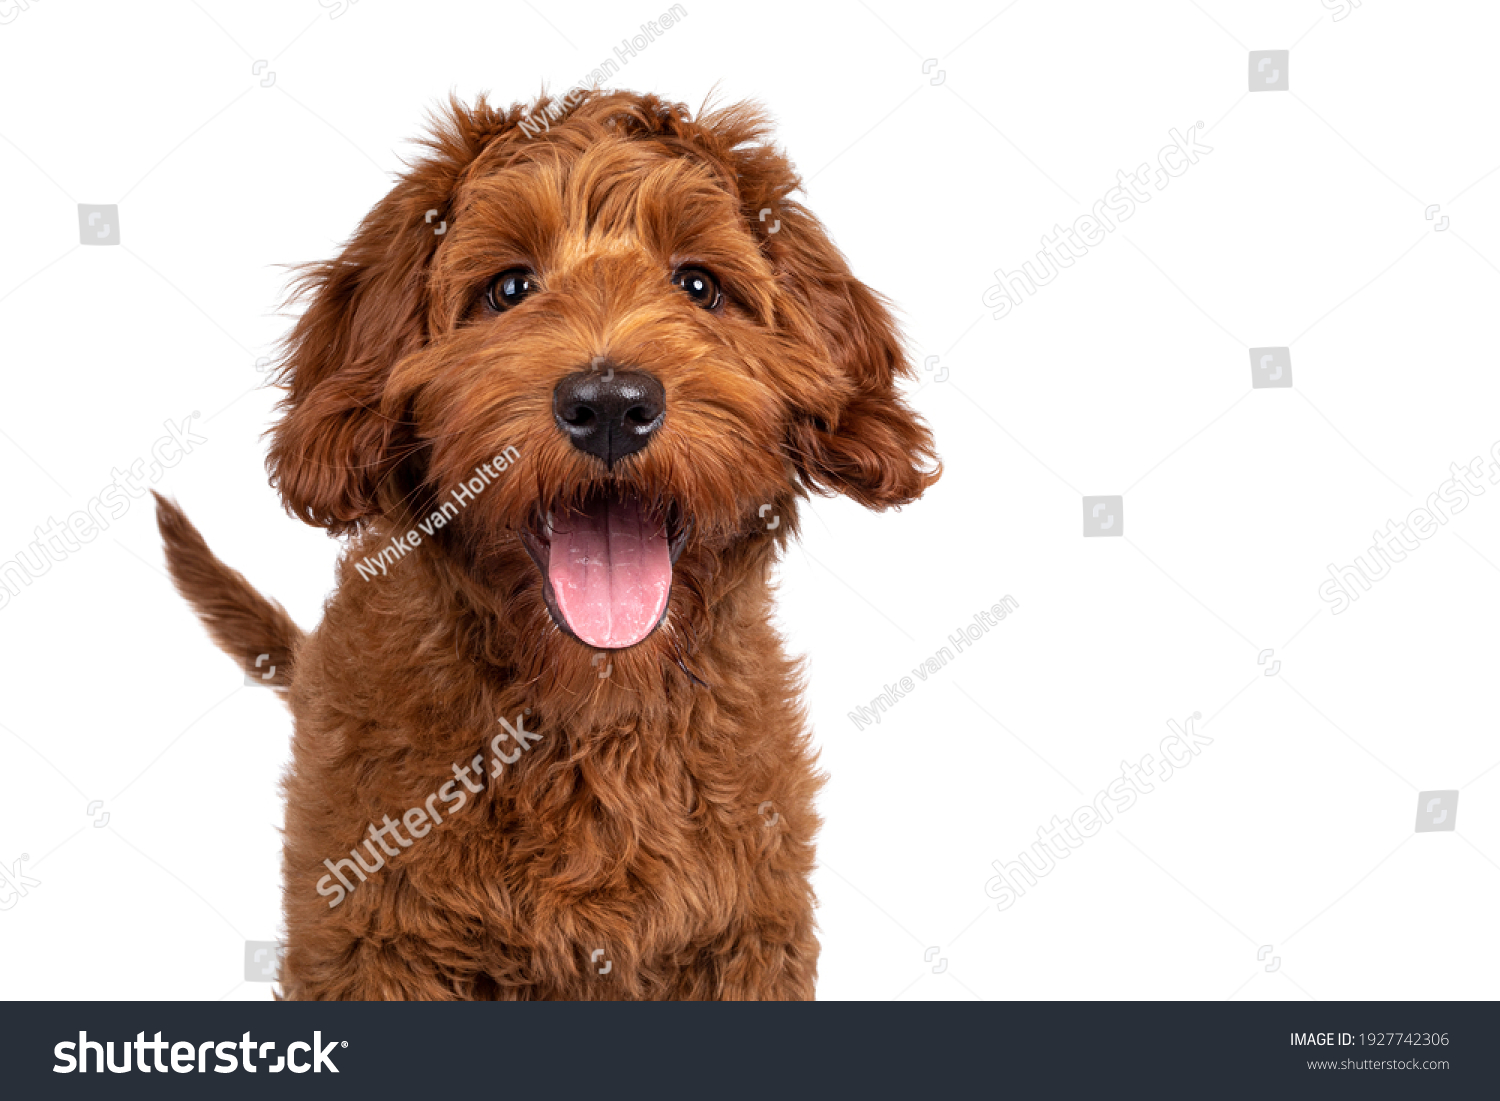 Funny head shot of cute red Cobberdog puppy, standing facing front. Looking curious towards camera. Isolated on white background. Tongue out. #1927742306